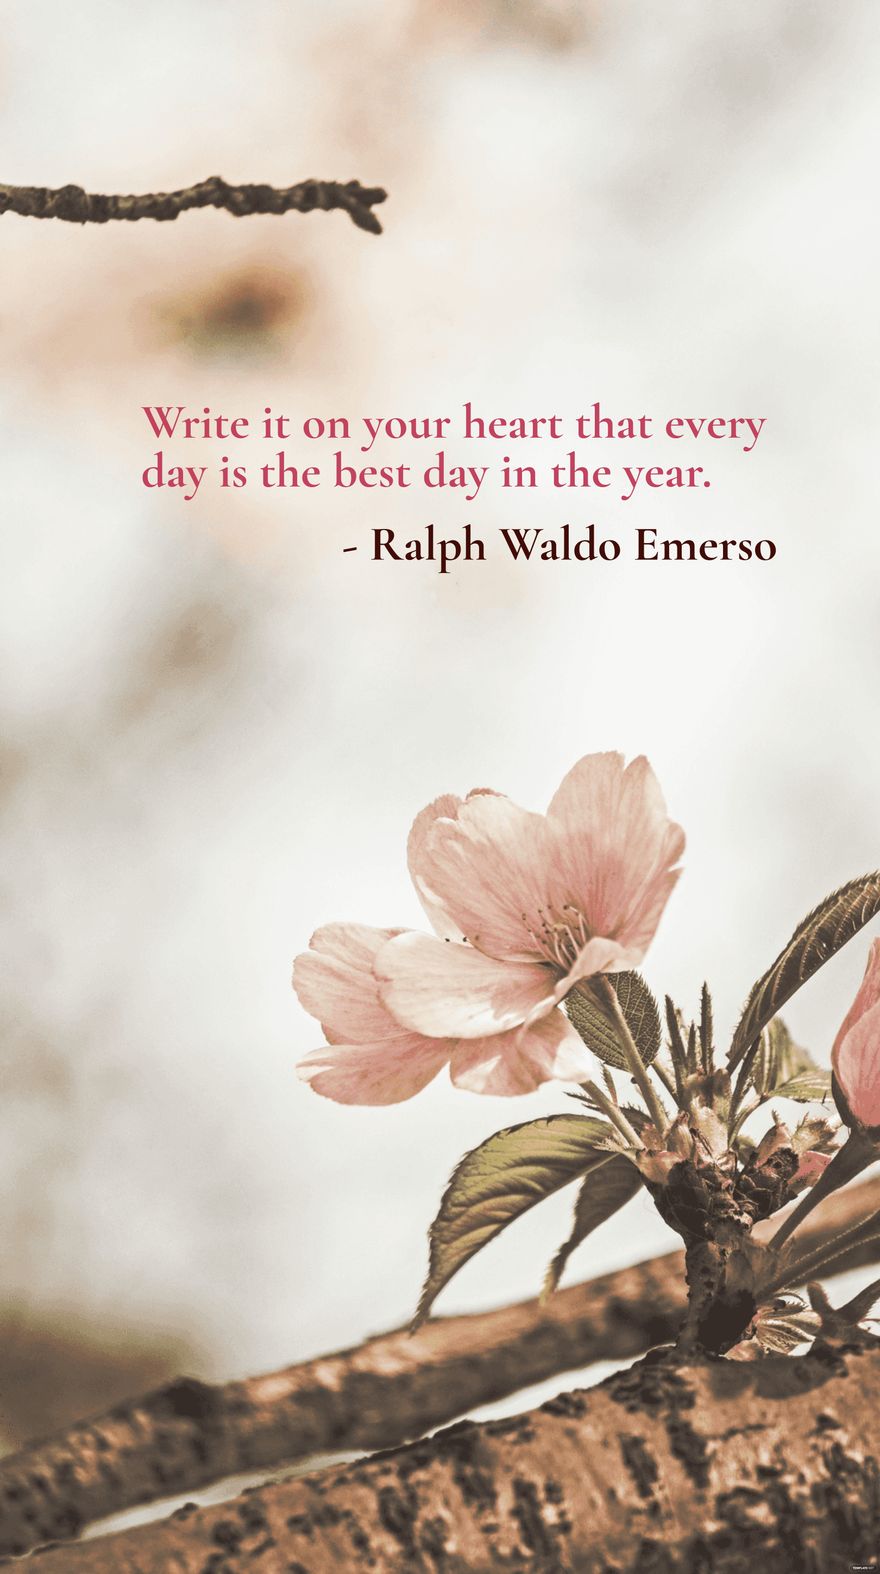 Free Write it on your heart that every day is the best day in the year.